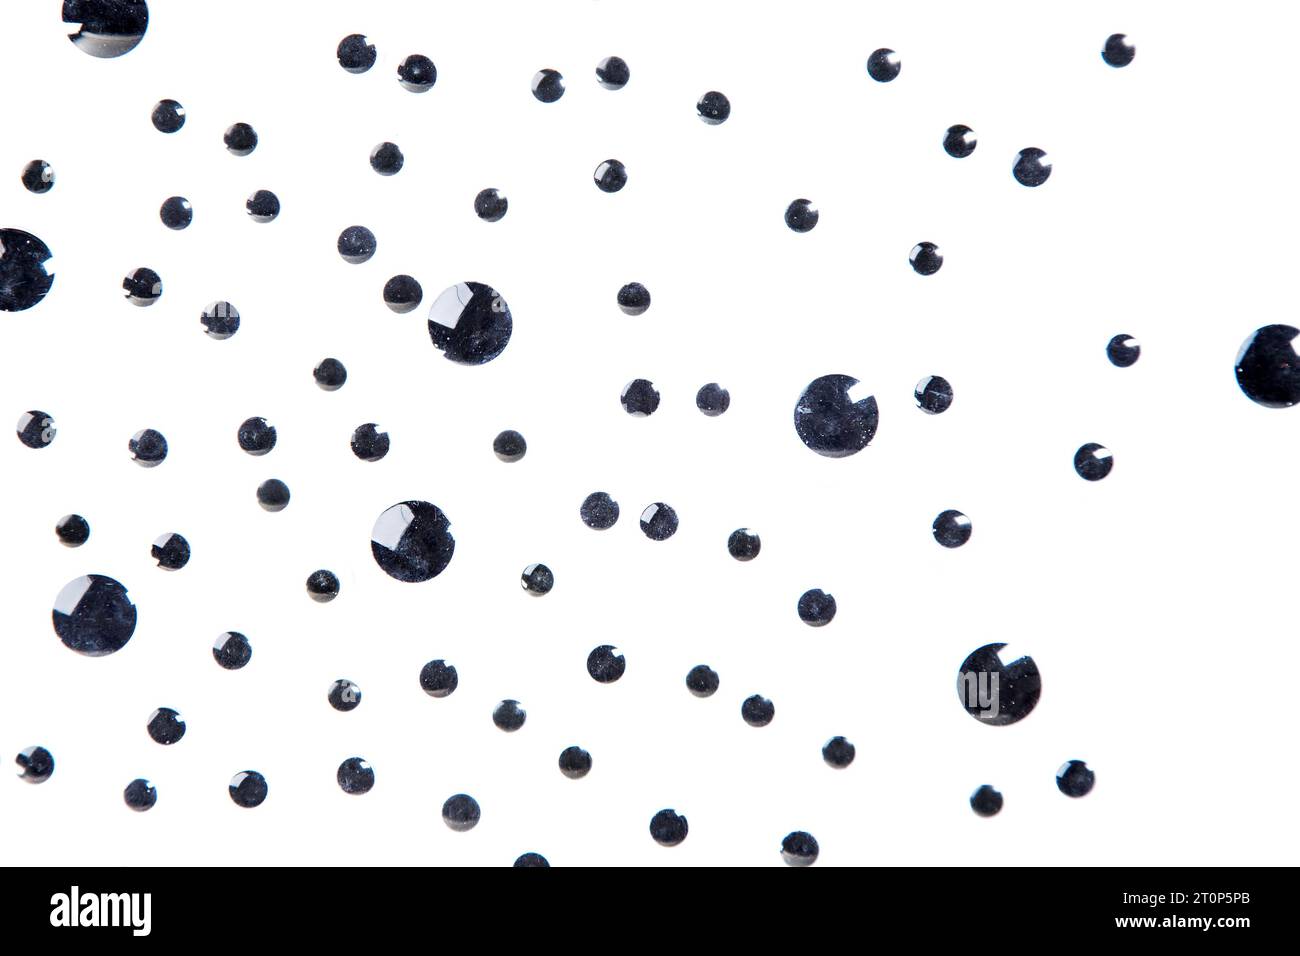 Googly eyes are small plastic craft supplies used to imitate eyeballs  isolated on black background., Stock image